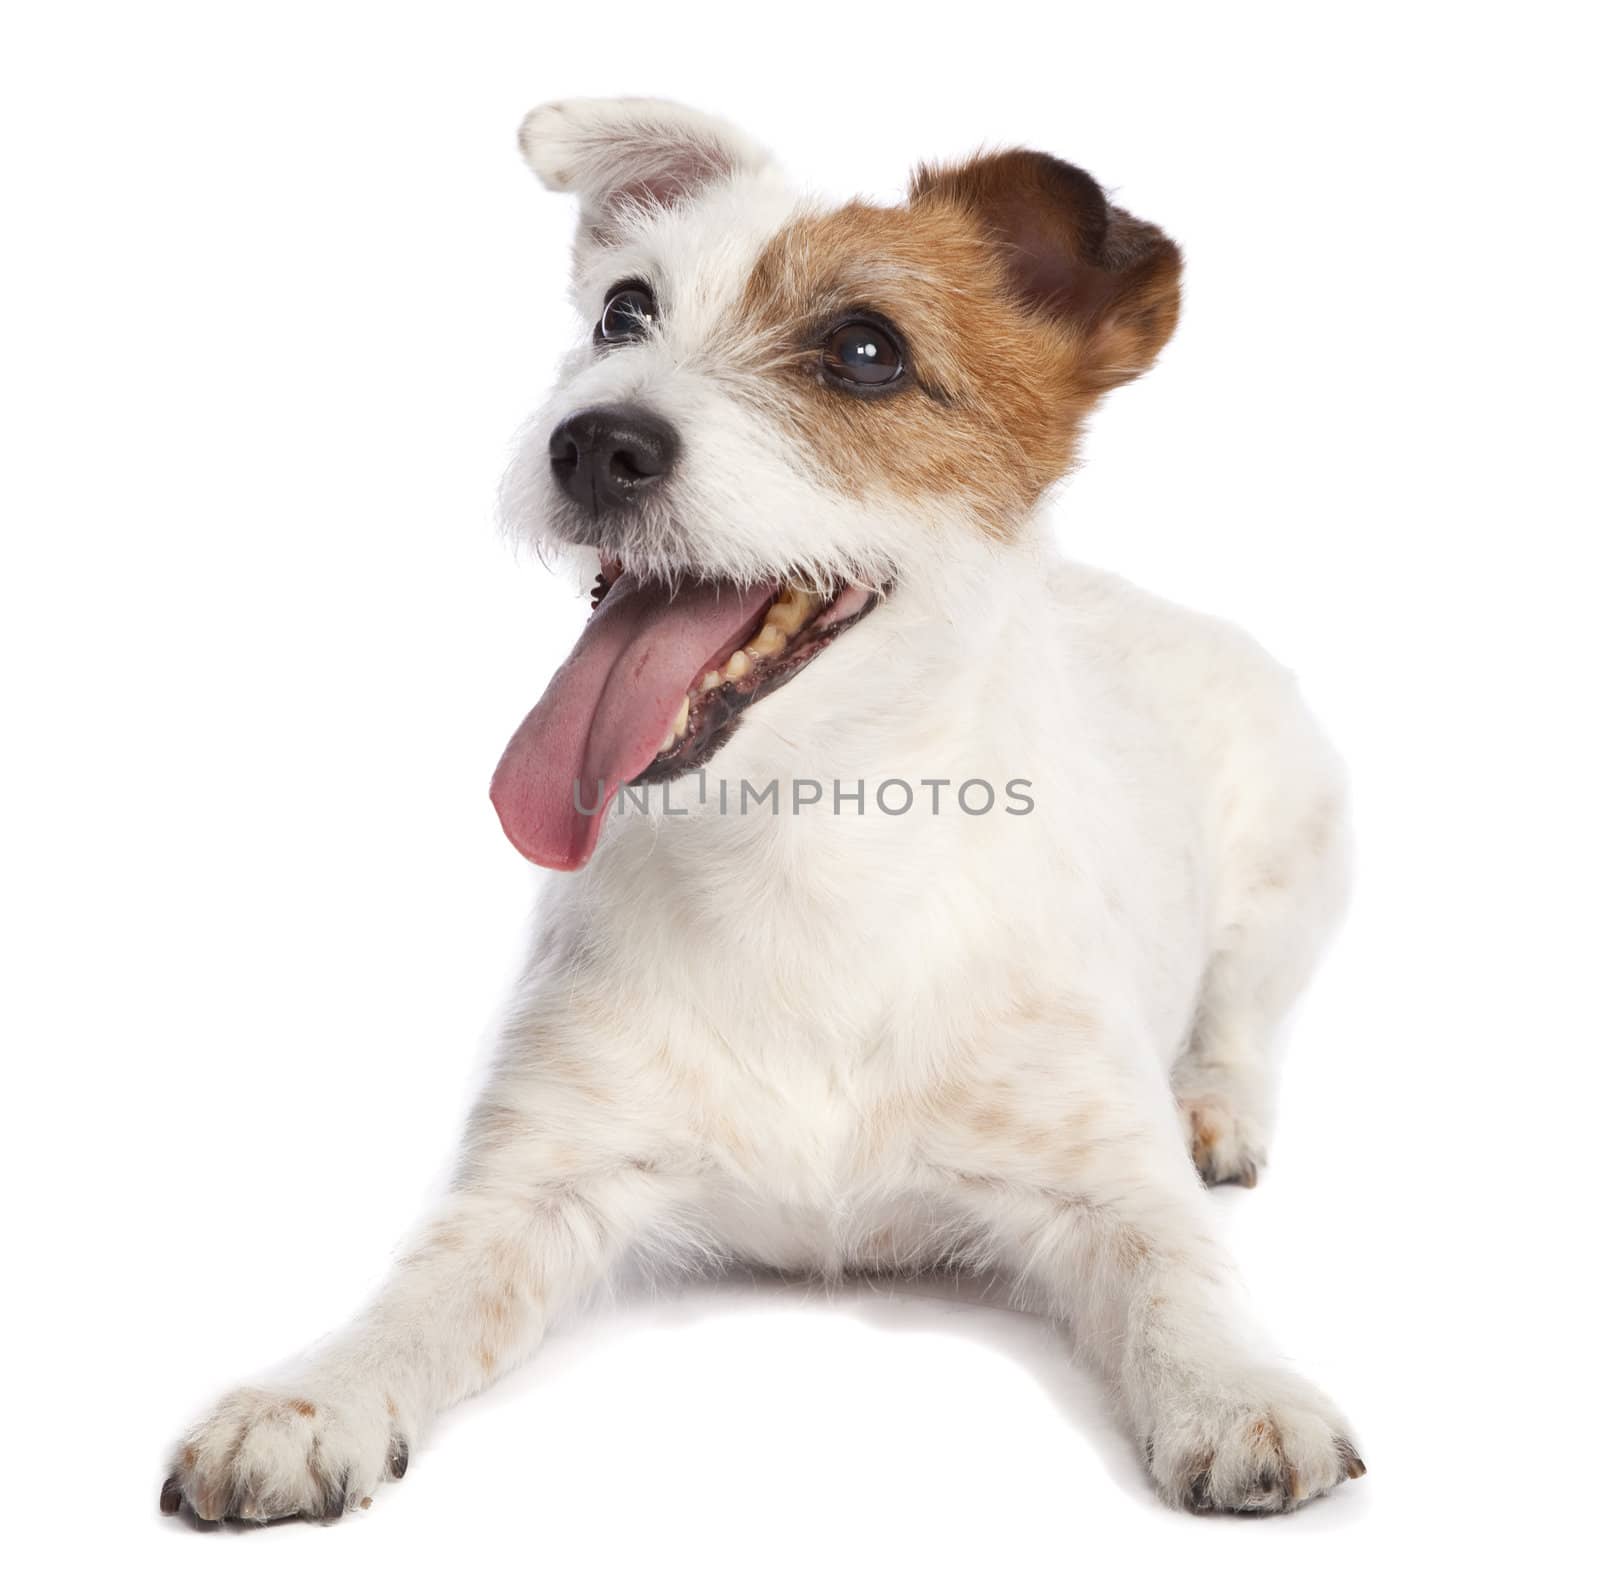 isolated jack russell terrier smiling and lying down over white background